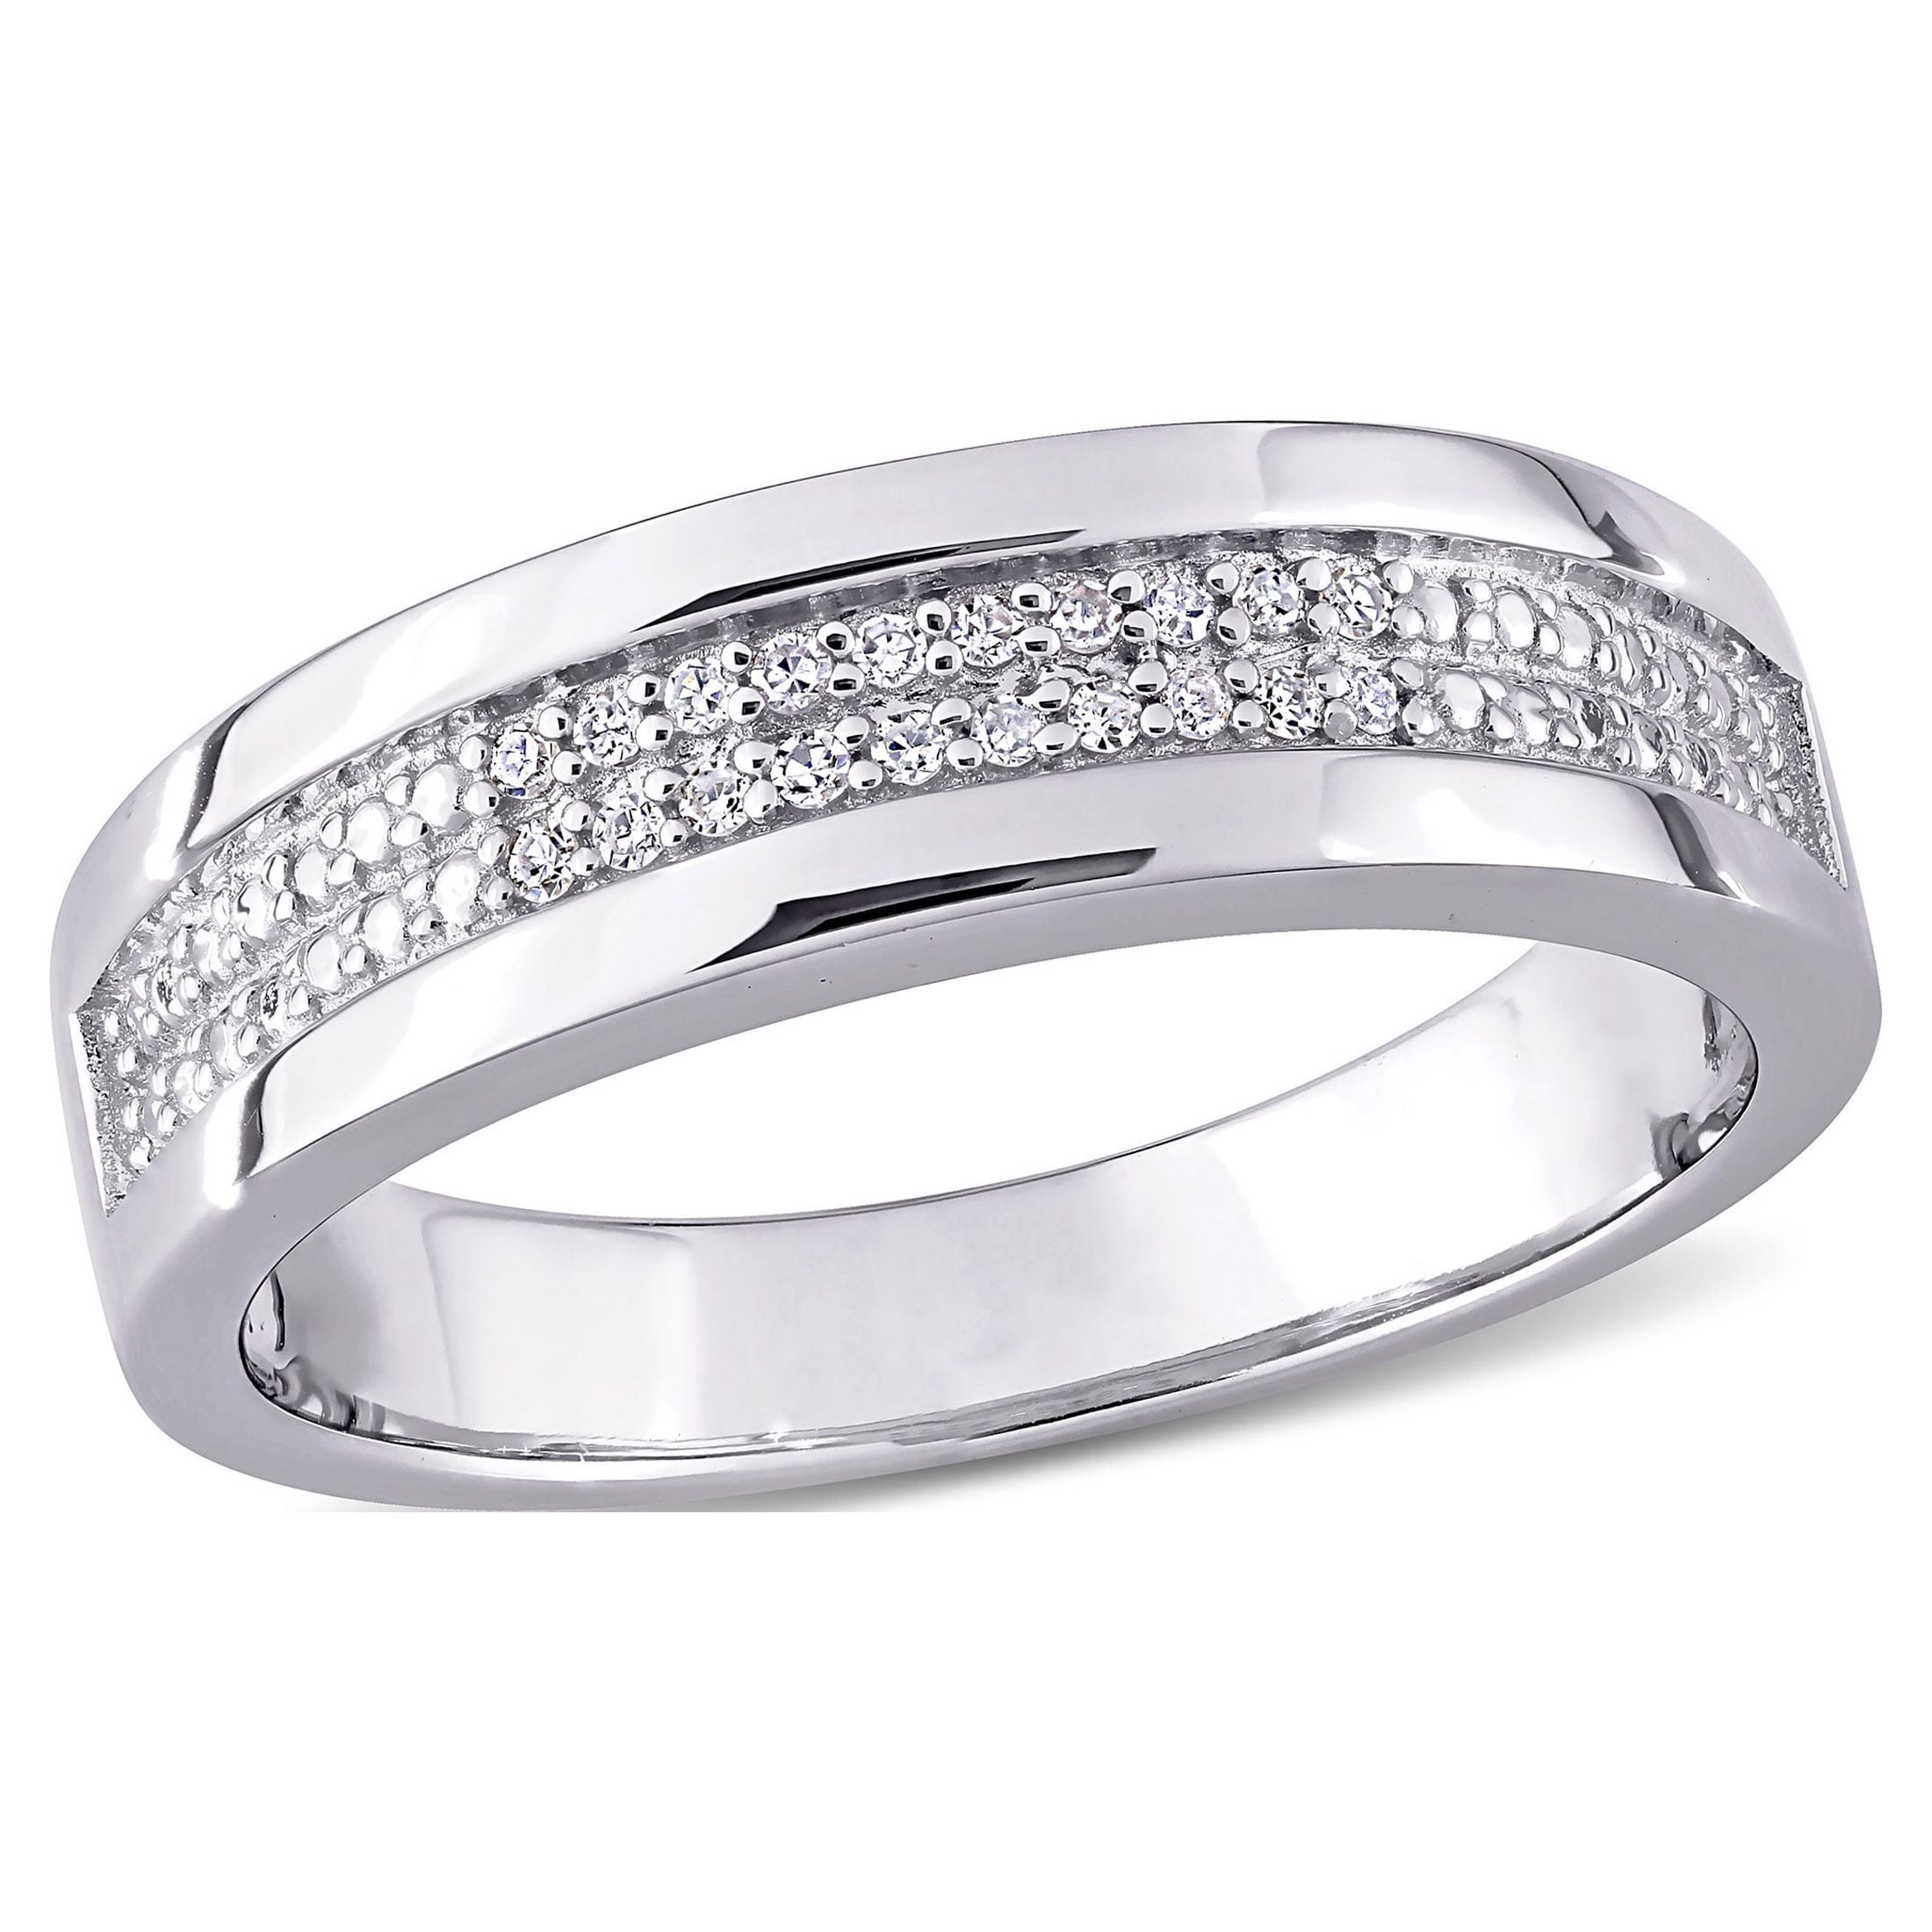 Diamond Rings Sterling Silver at Elma Jewellery Mobile Site